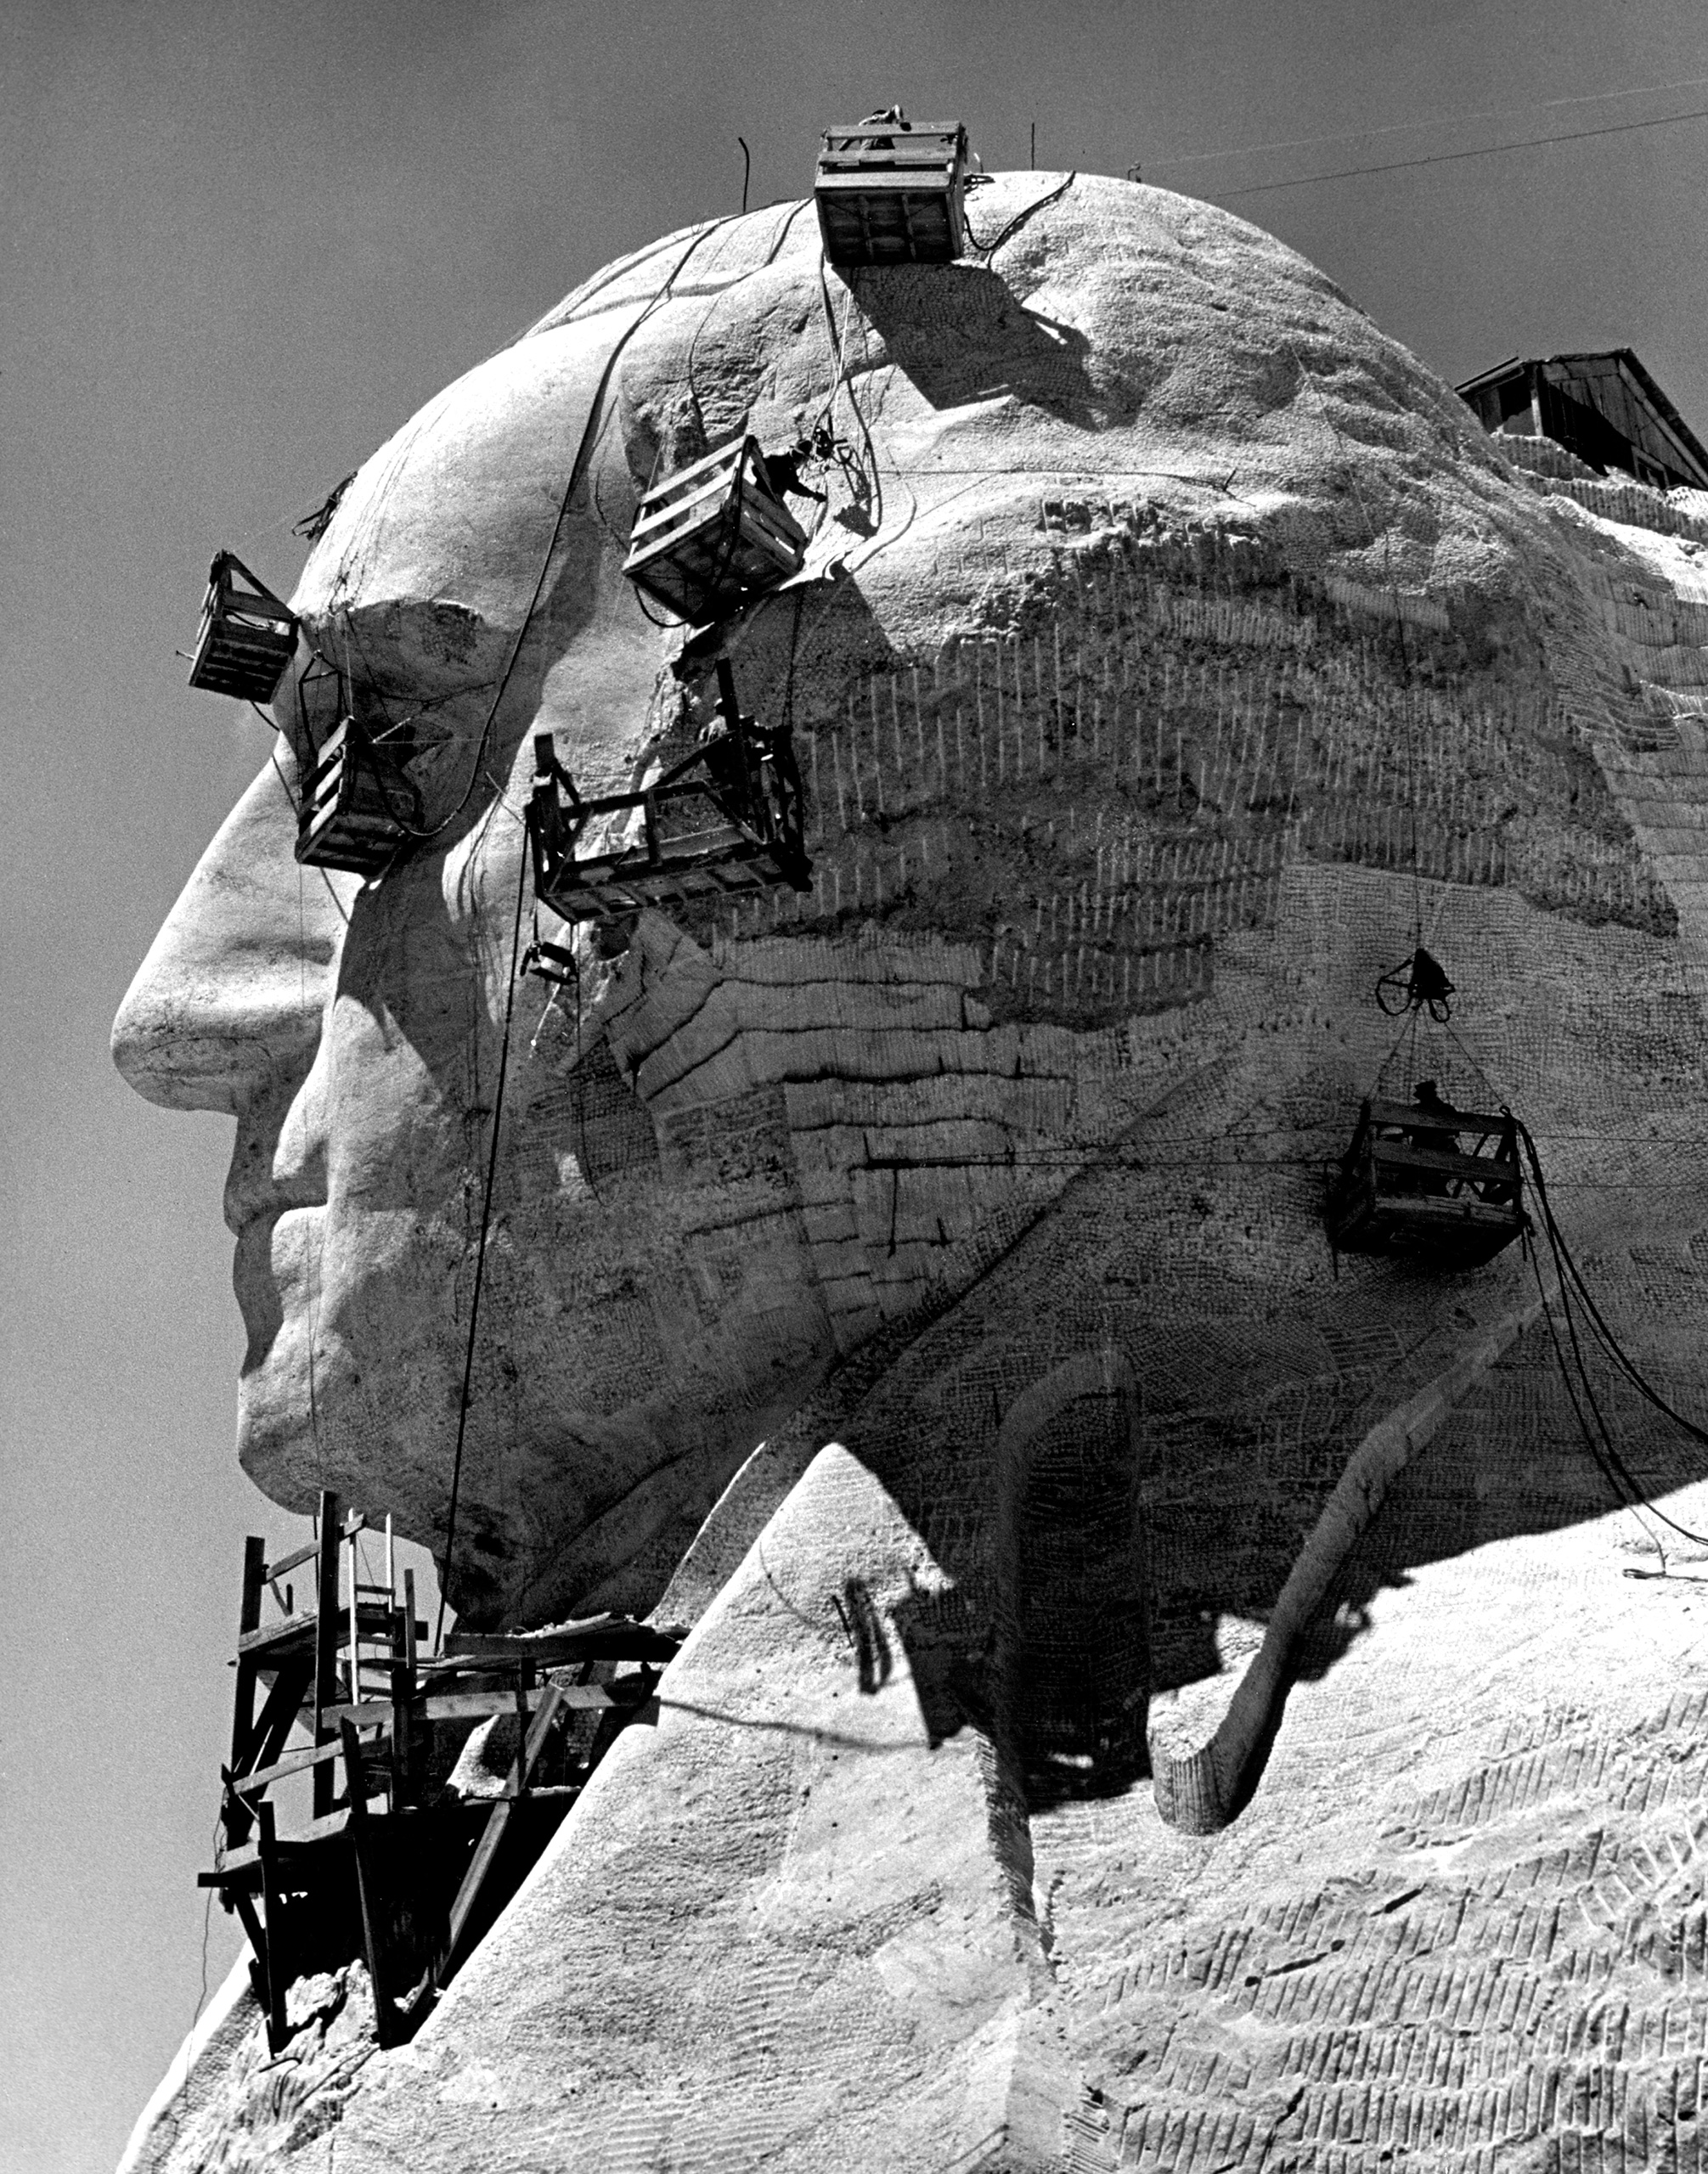 Construction of George Washington section of Mt. Rushmore Monument, circa 1941.